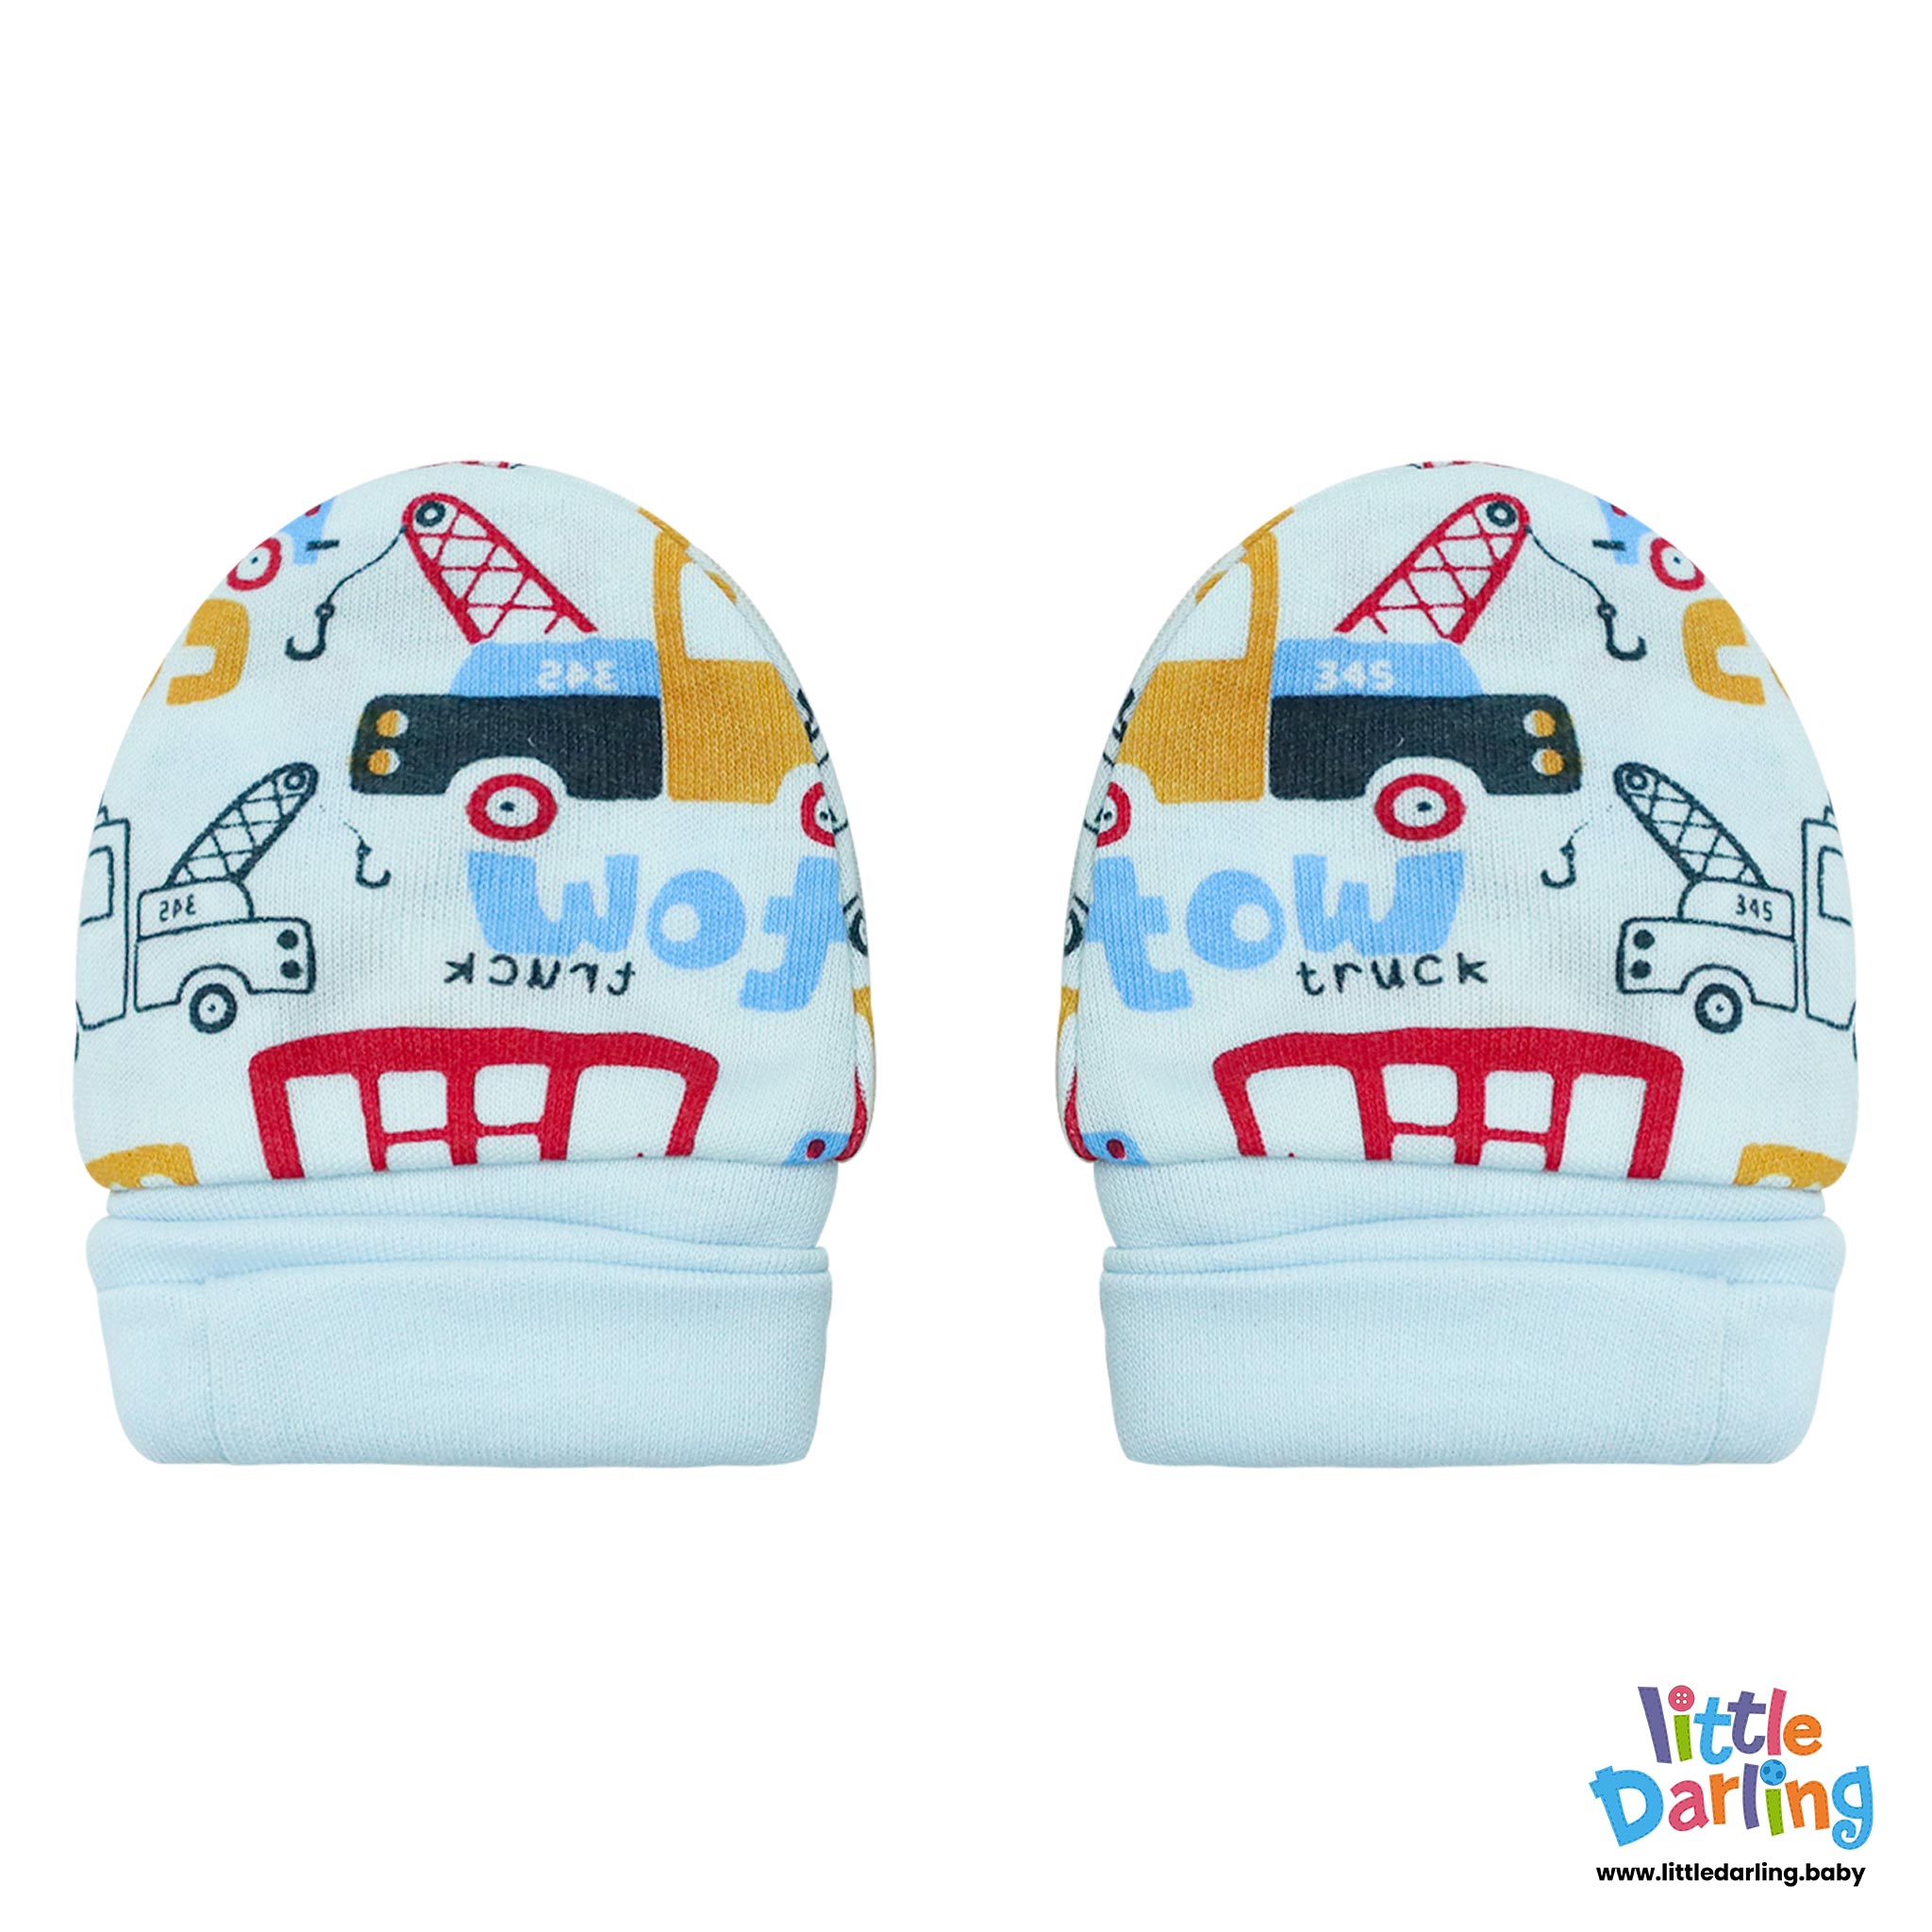 Baby Mittens Pair Pk Of 2 Truck & Car by Little Darling